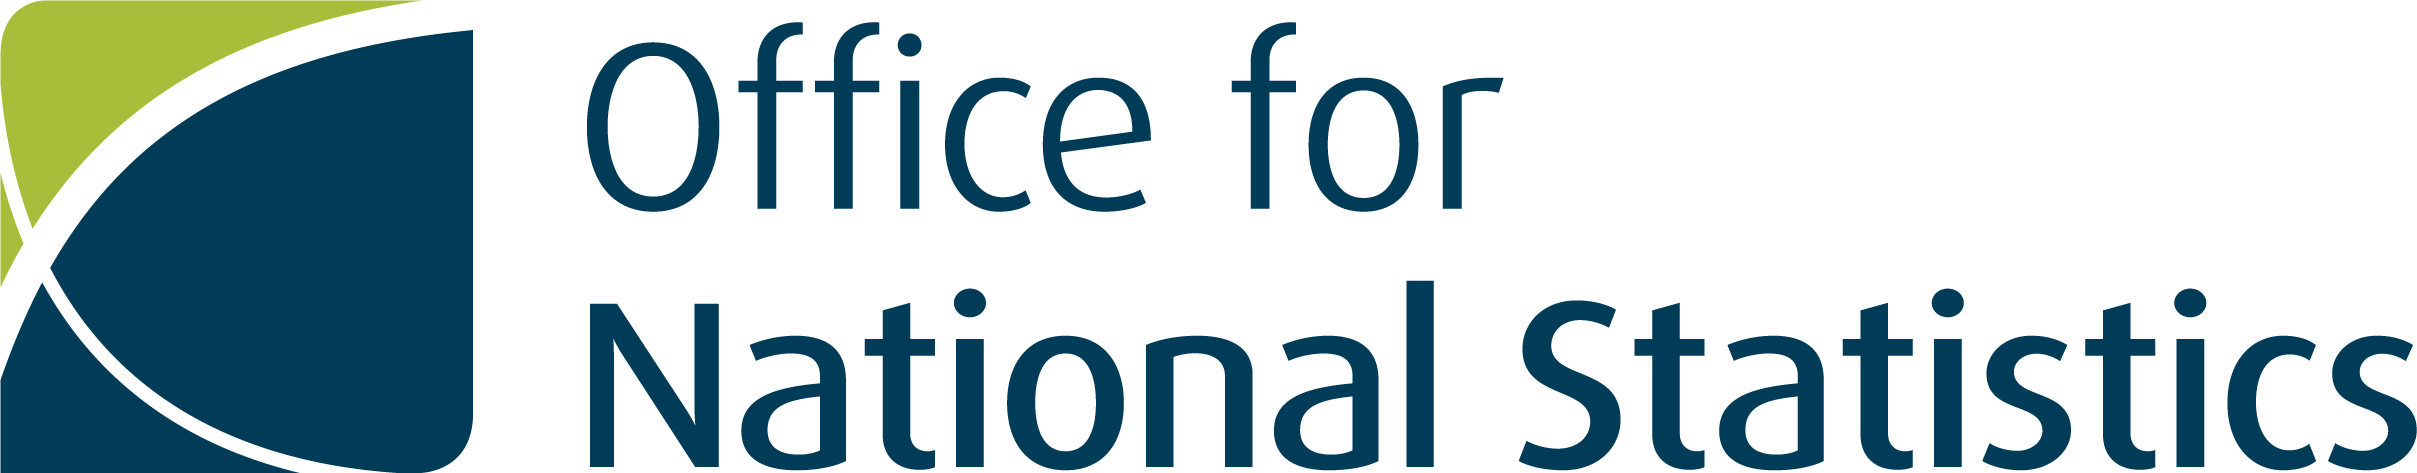 Logo of data-science-campus-office-for-national-statistics